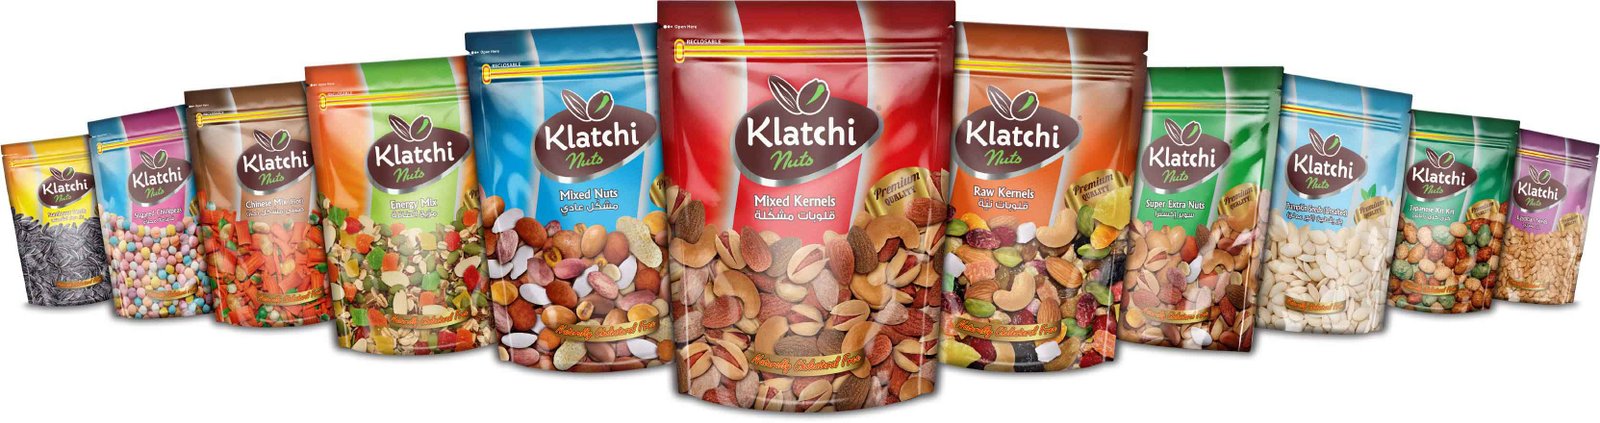 Different types of big bags filled with klatchi nuts 